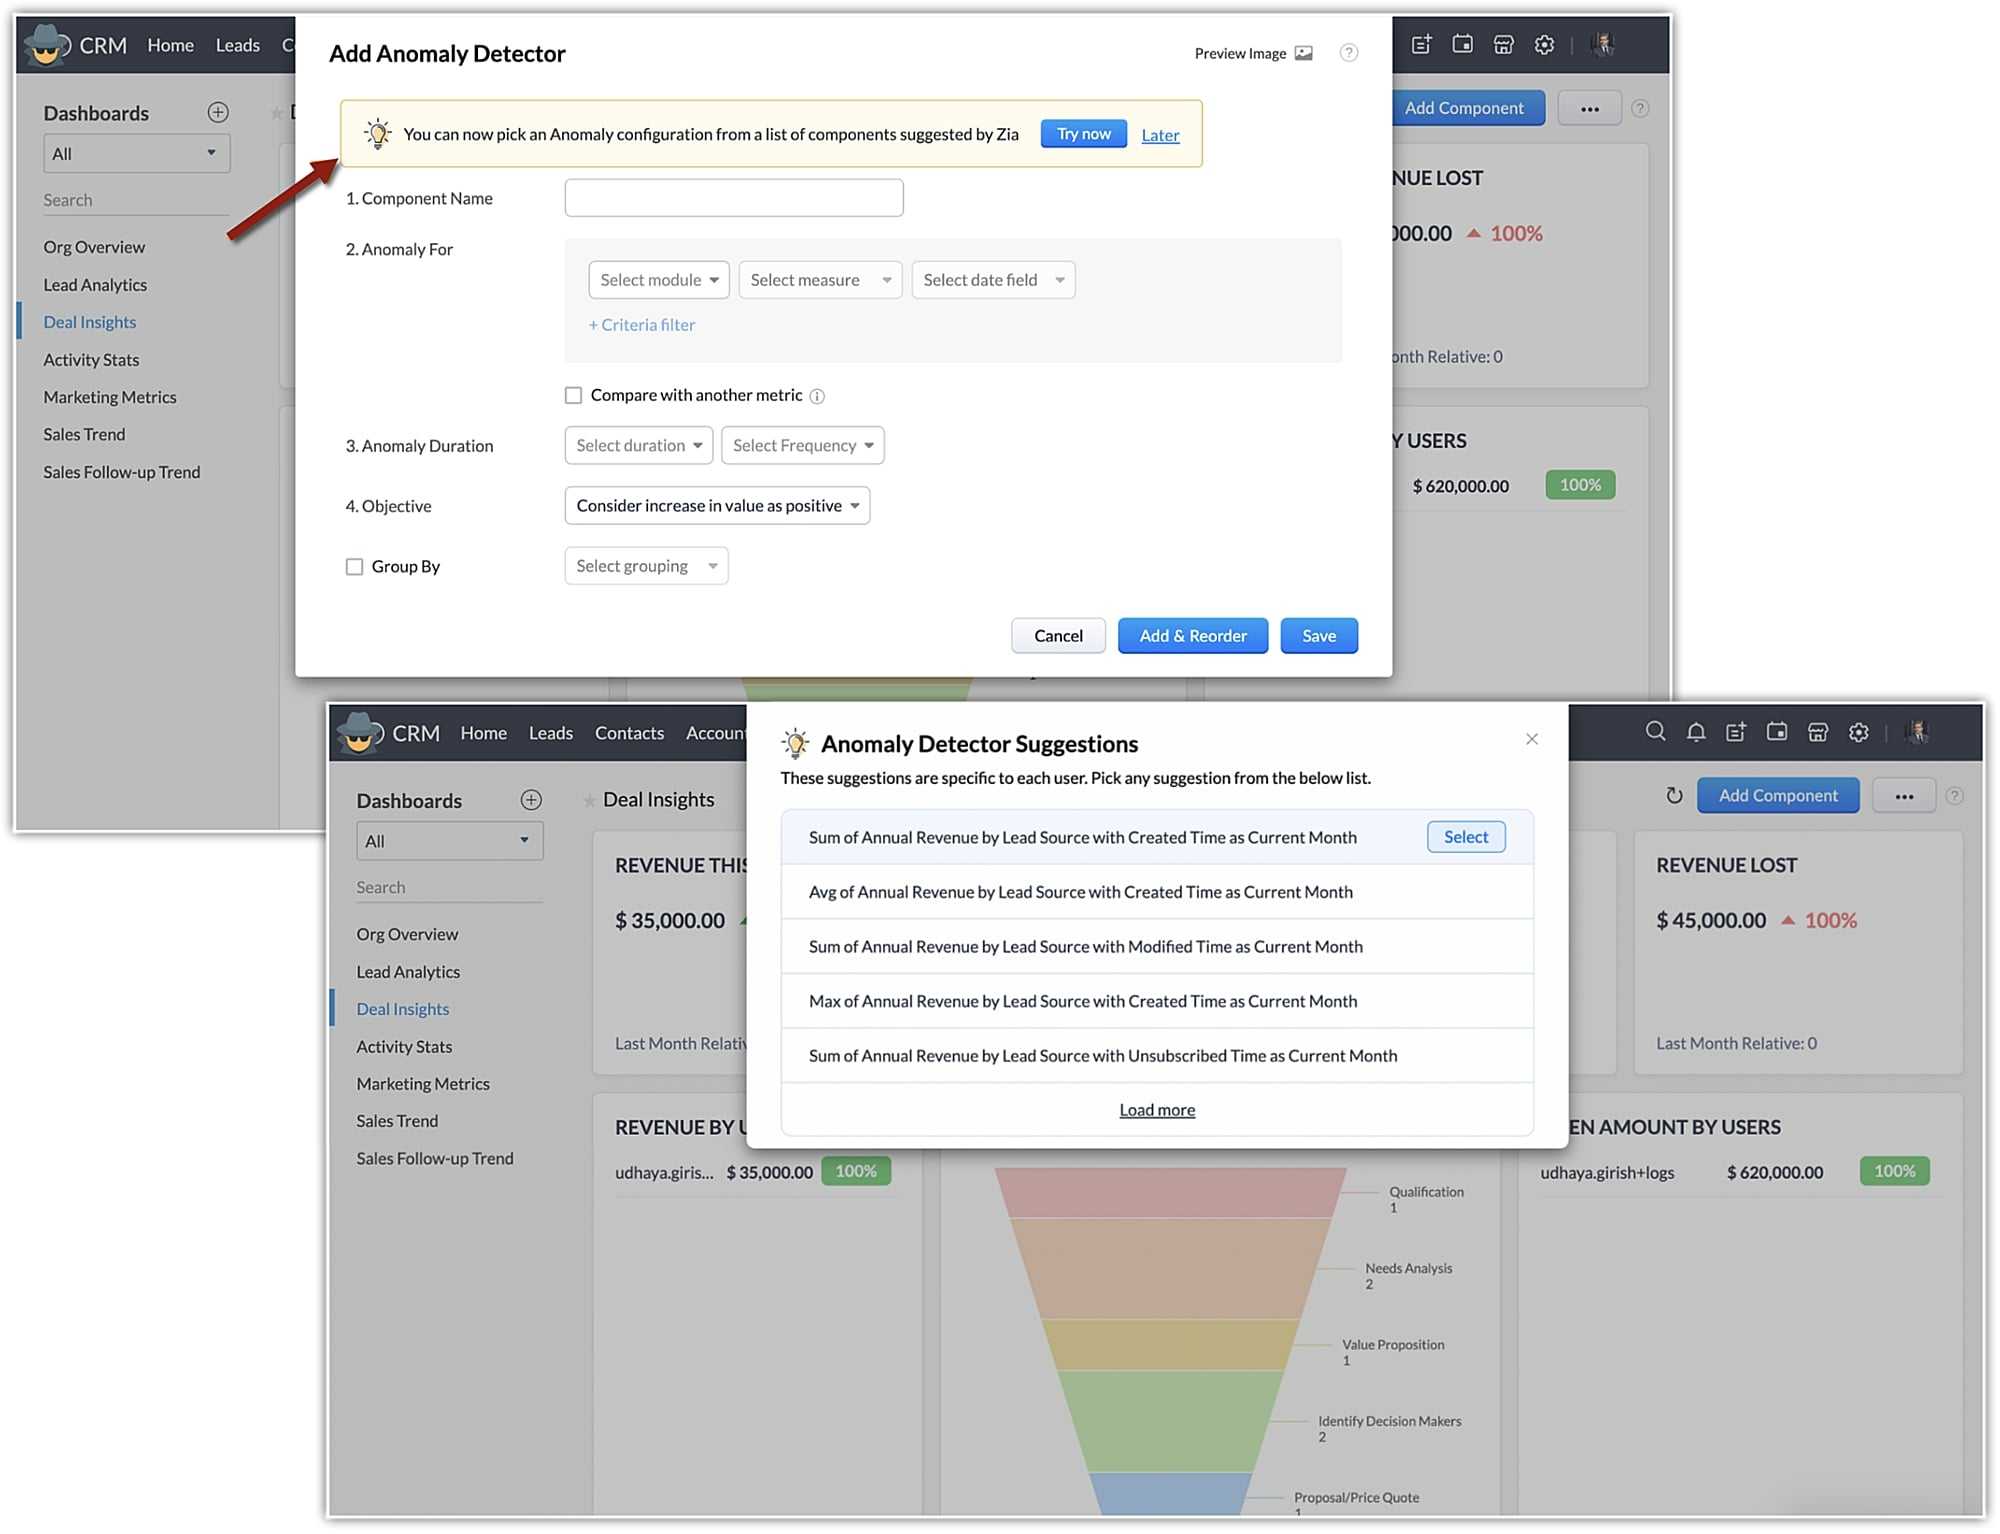 Add anomoly Detector Suggestions in Zoho CRM